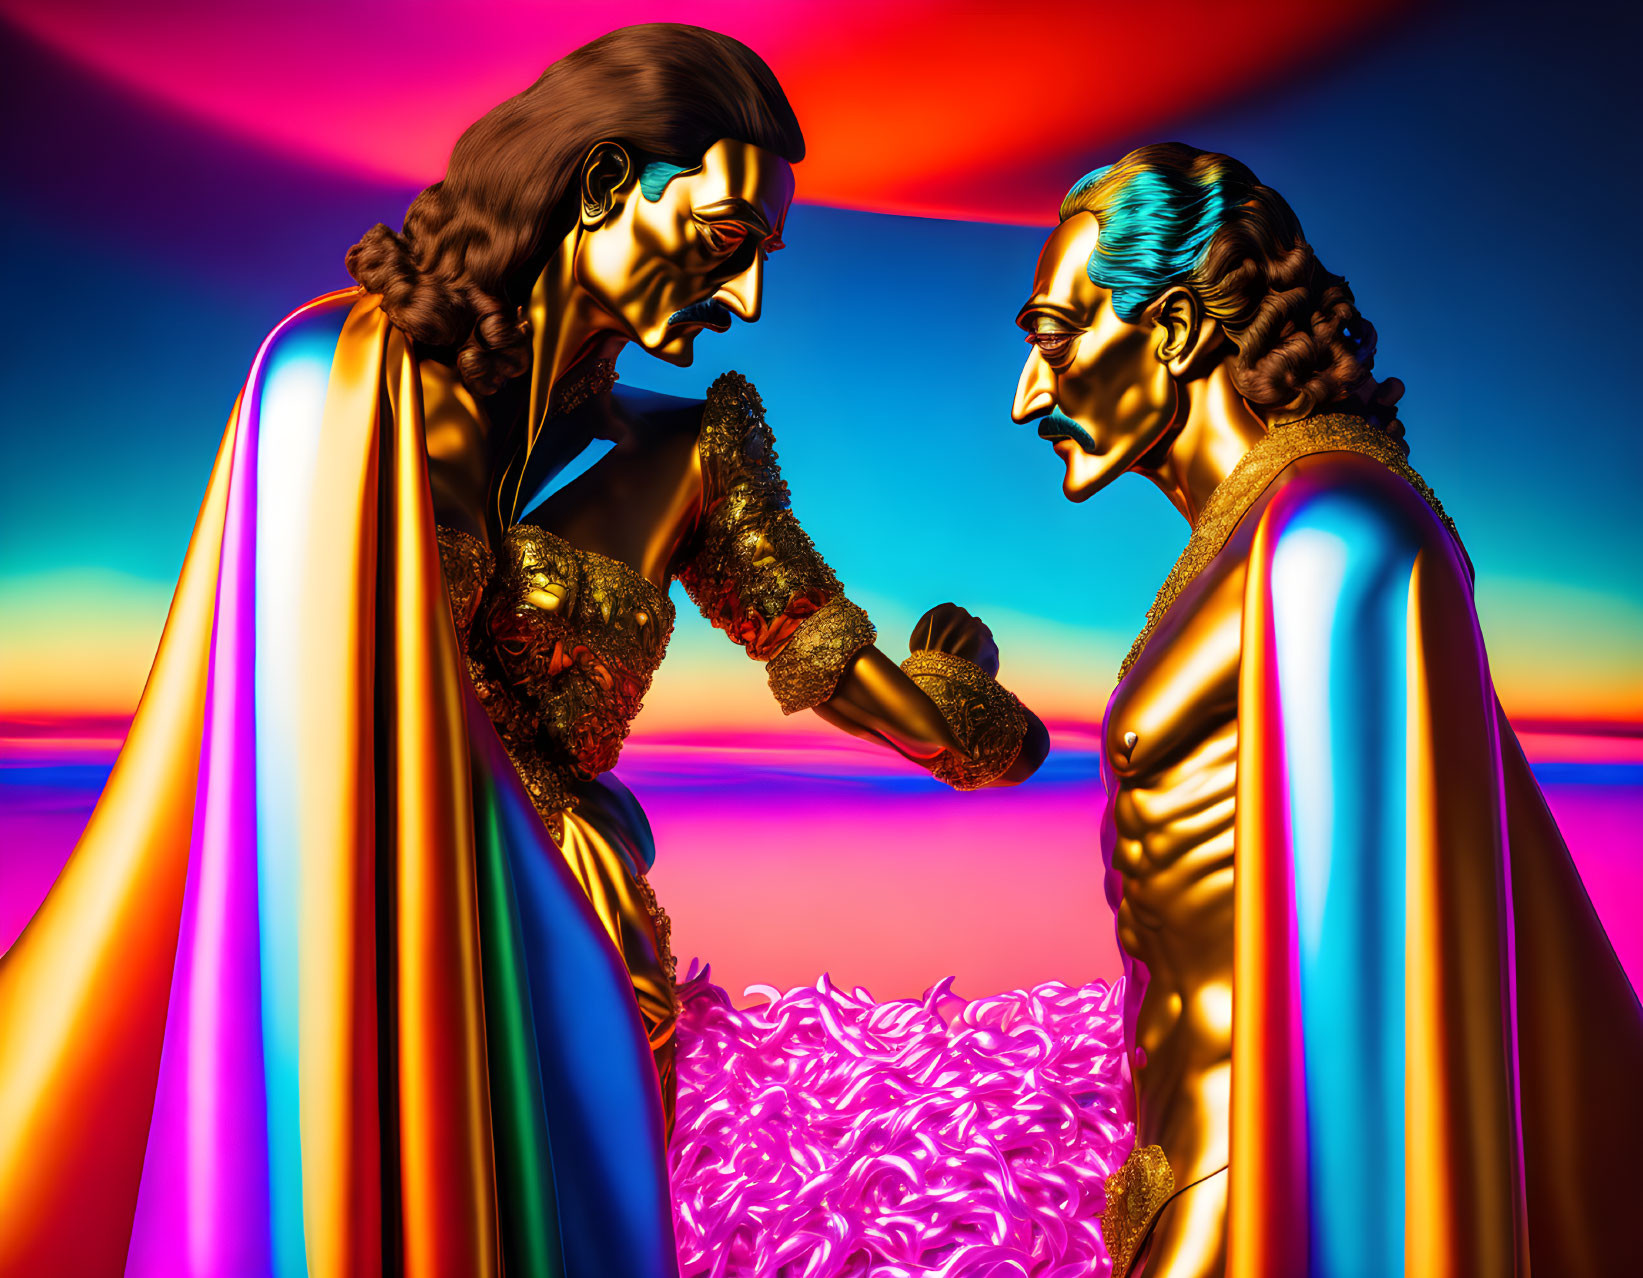 Stylized metallic figures in tense discussion against colorful backdrop